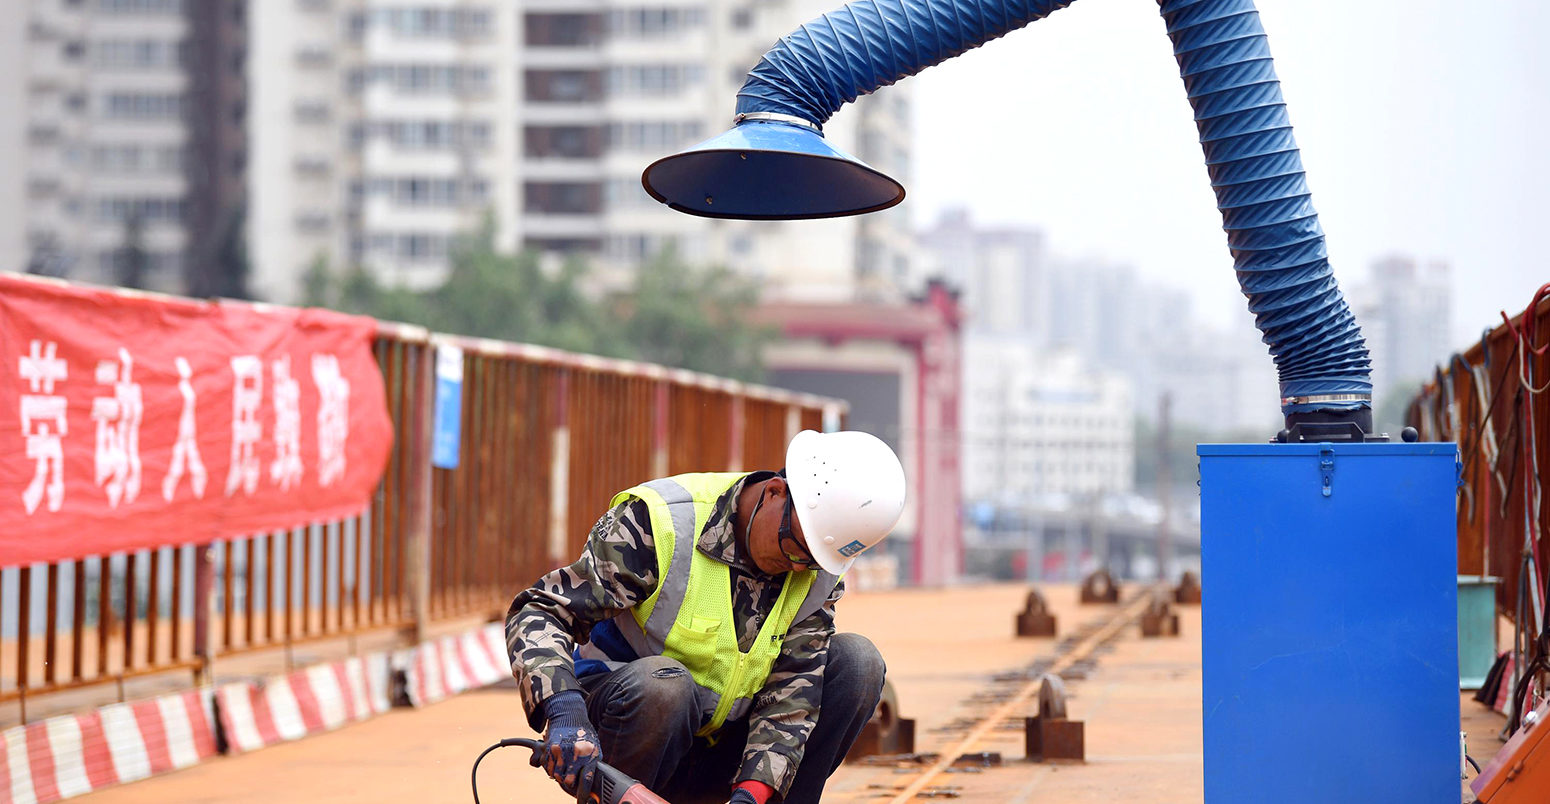 A construction worker on site in Xi'an, northwest China's Shaanxi Province, 01 May 2019. Credit: Xinhua / Alamy Stock Photo. T6GCD4